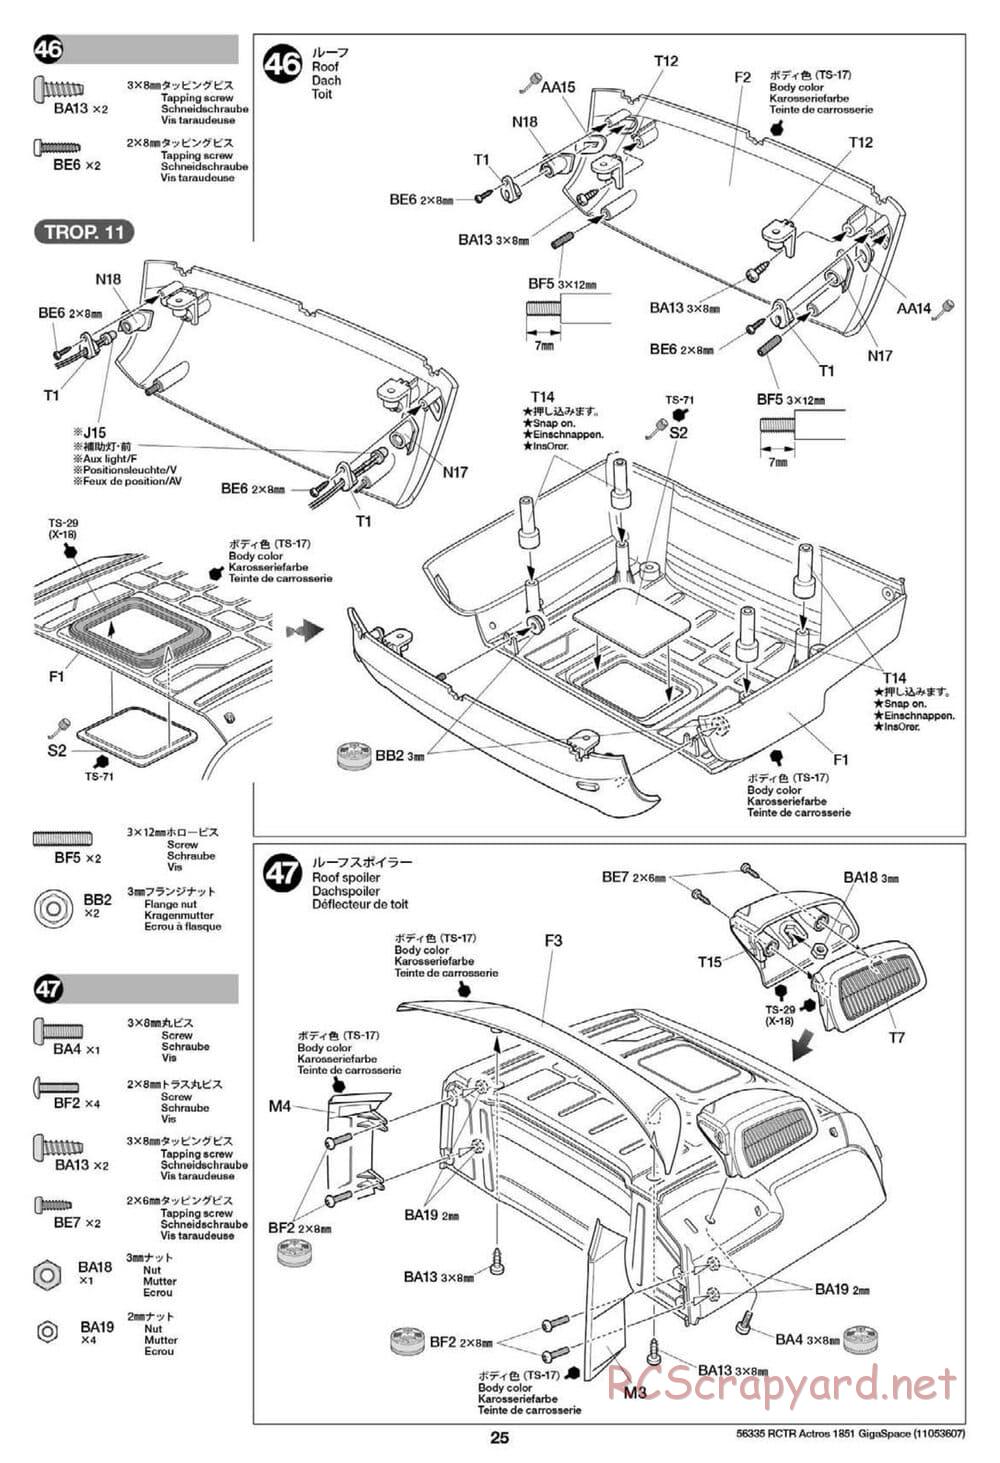 Tamiya - Mercedes-Benz Actros 1851 Gigaspace Tractor Truck Chassis - Manual - Page 25